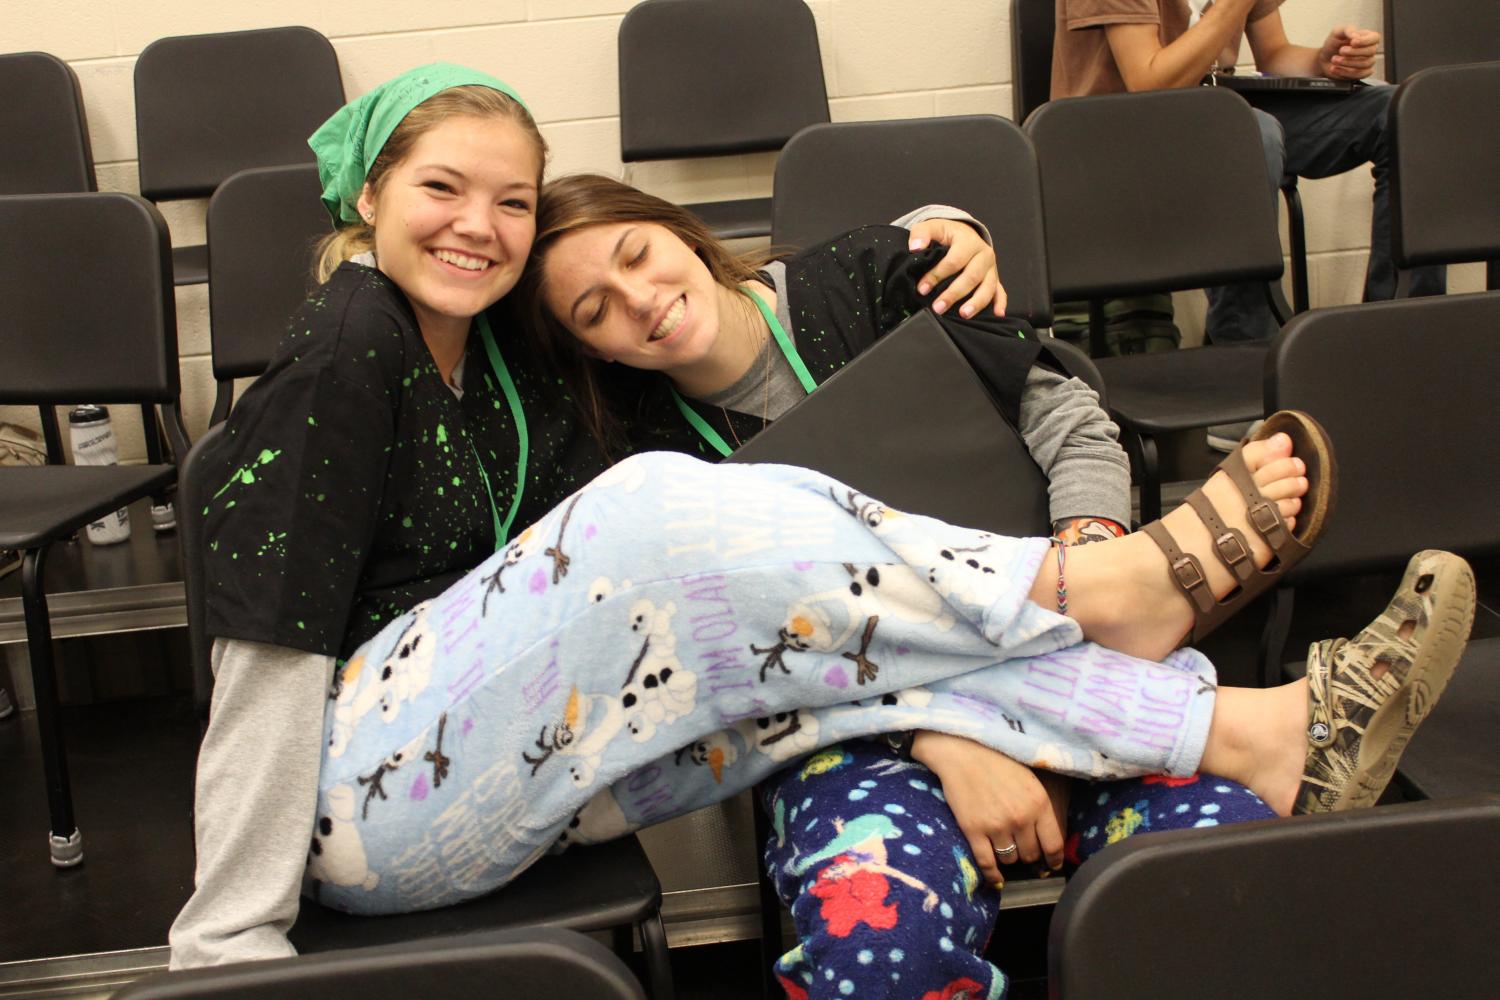 Seniors Danielle Fite and Abbie Lockie wore colorful pajama pants to match their King of the Couch costumes to the days theme. 